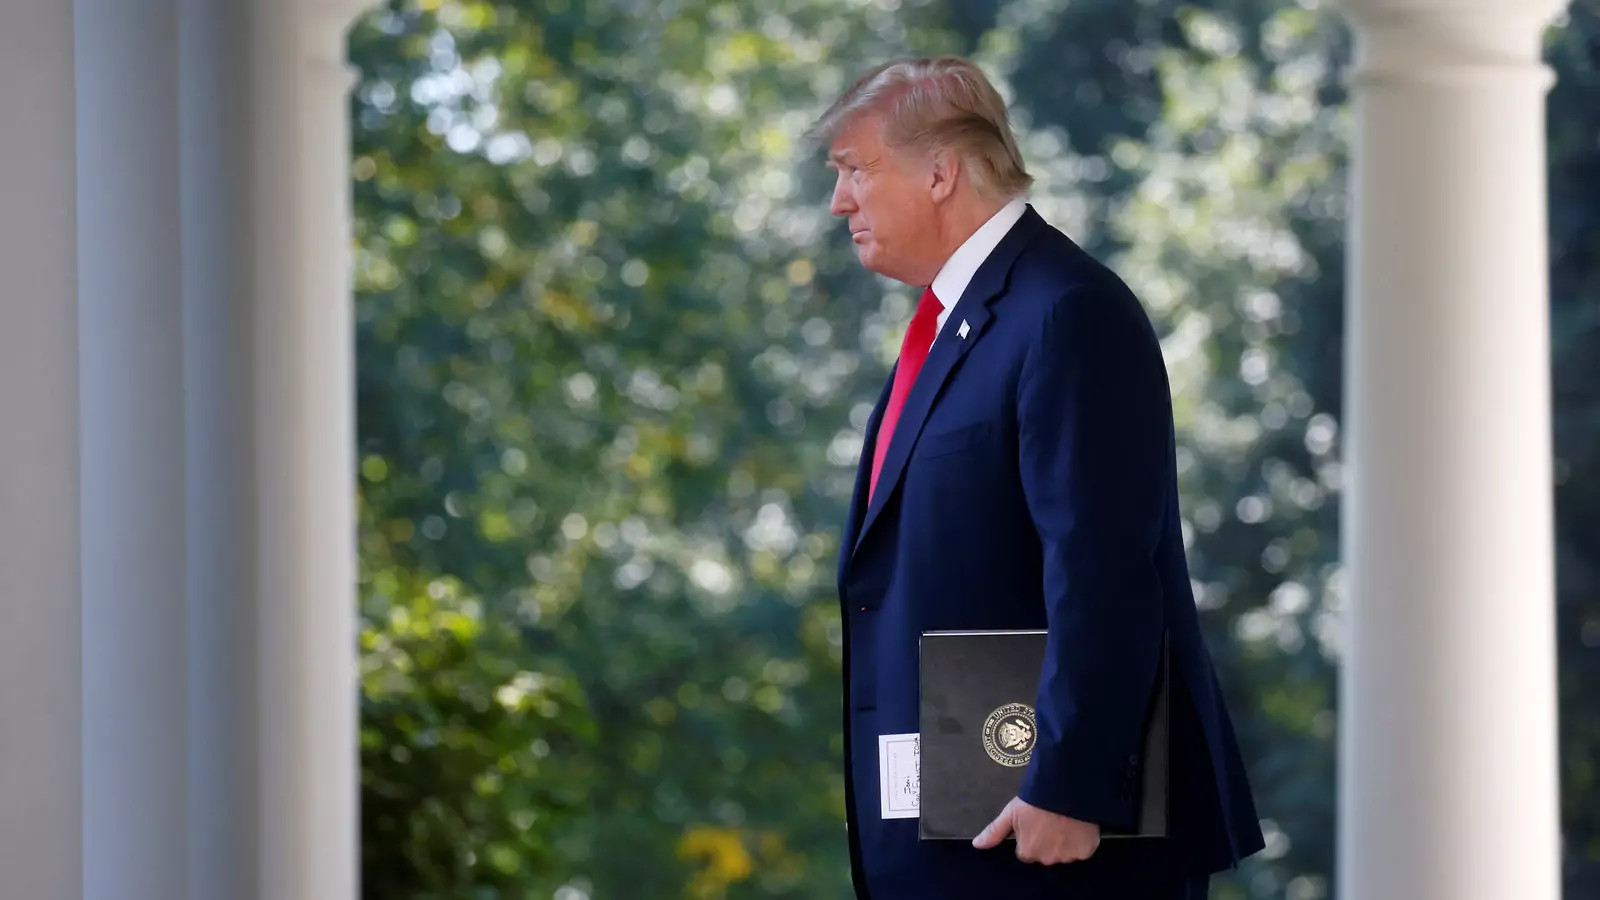 U.S. President Donald Trump arrives to deliver remarks on the United States-Mexico-Canada Agreement (USMCA) at a news conference in the Rose Garden of the White House in Washington, U.S., October 1, 2018. 